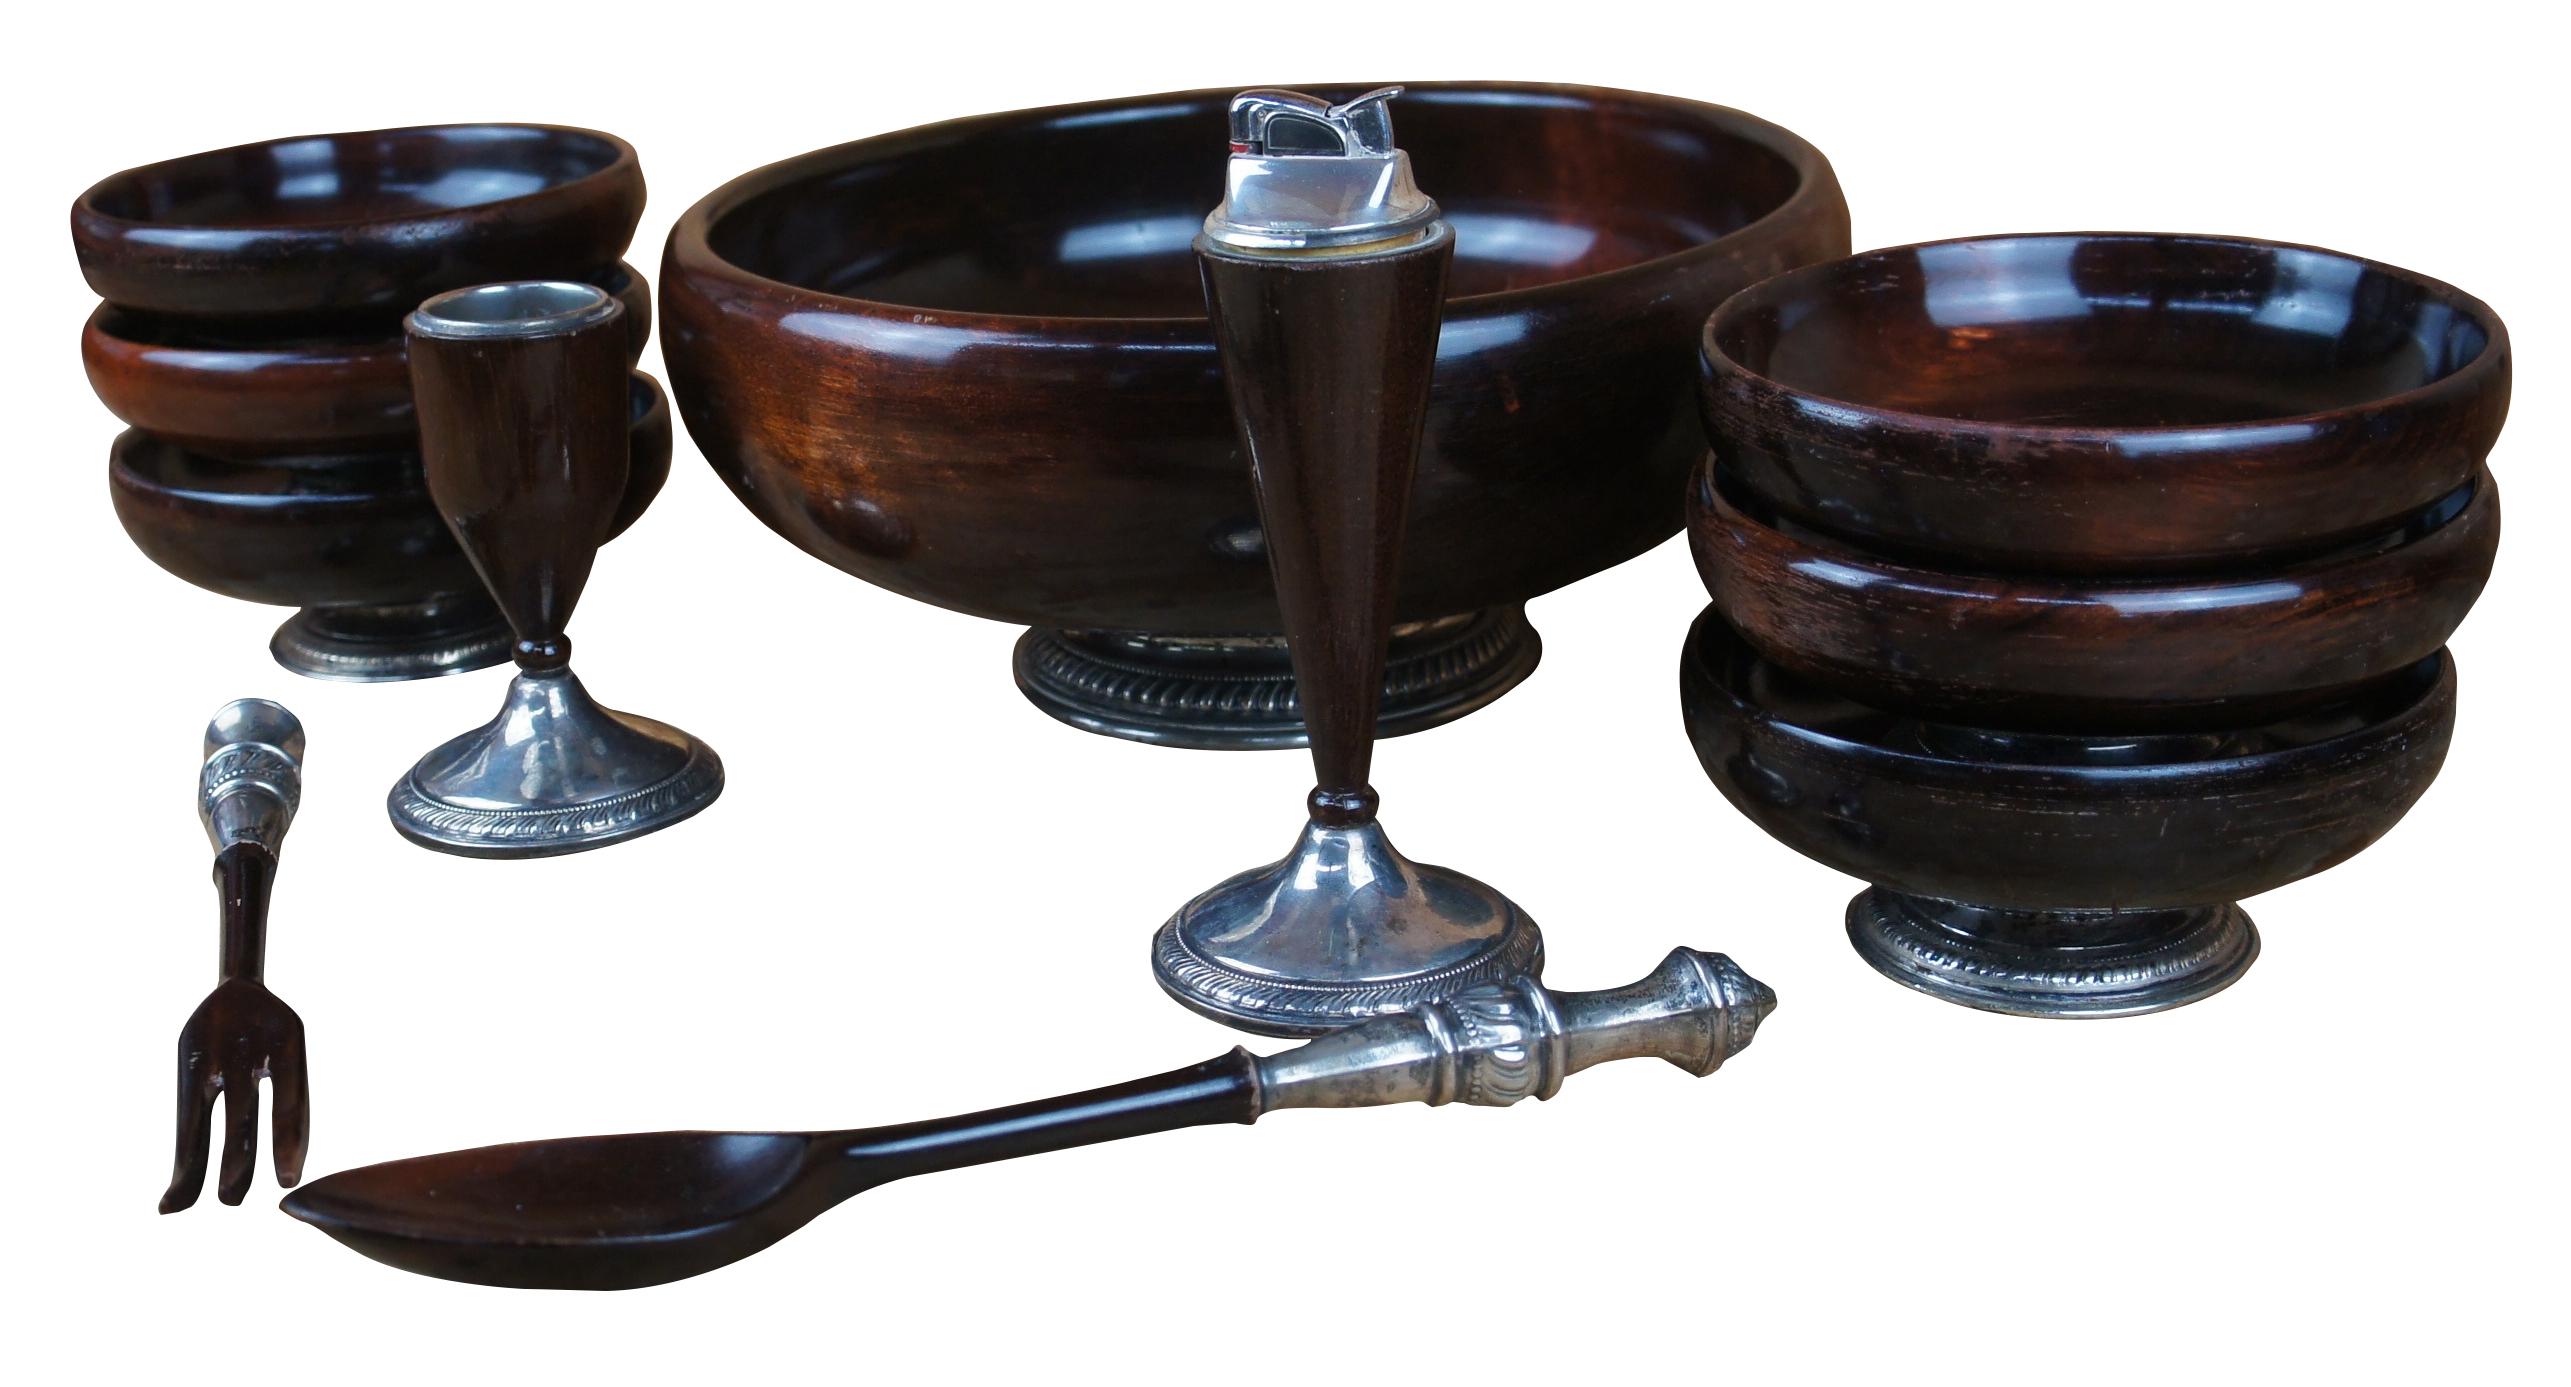 Mid century eleven piece Arrowsmith salad serving set featuring turned mahogany bowls with sterling silver 925 accents, including tongs and unique candlestick form lighter with ashtray. Circa 1960s.

server 1- 11.25